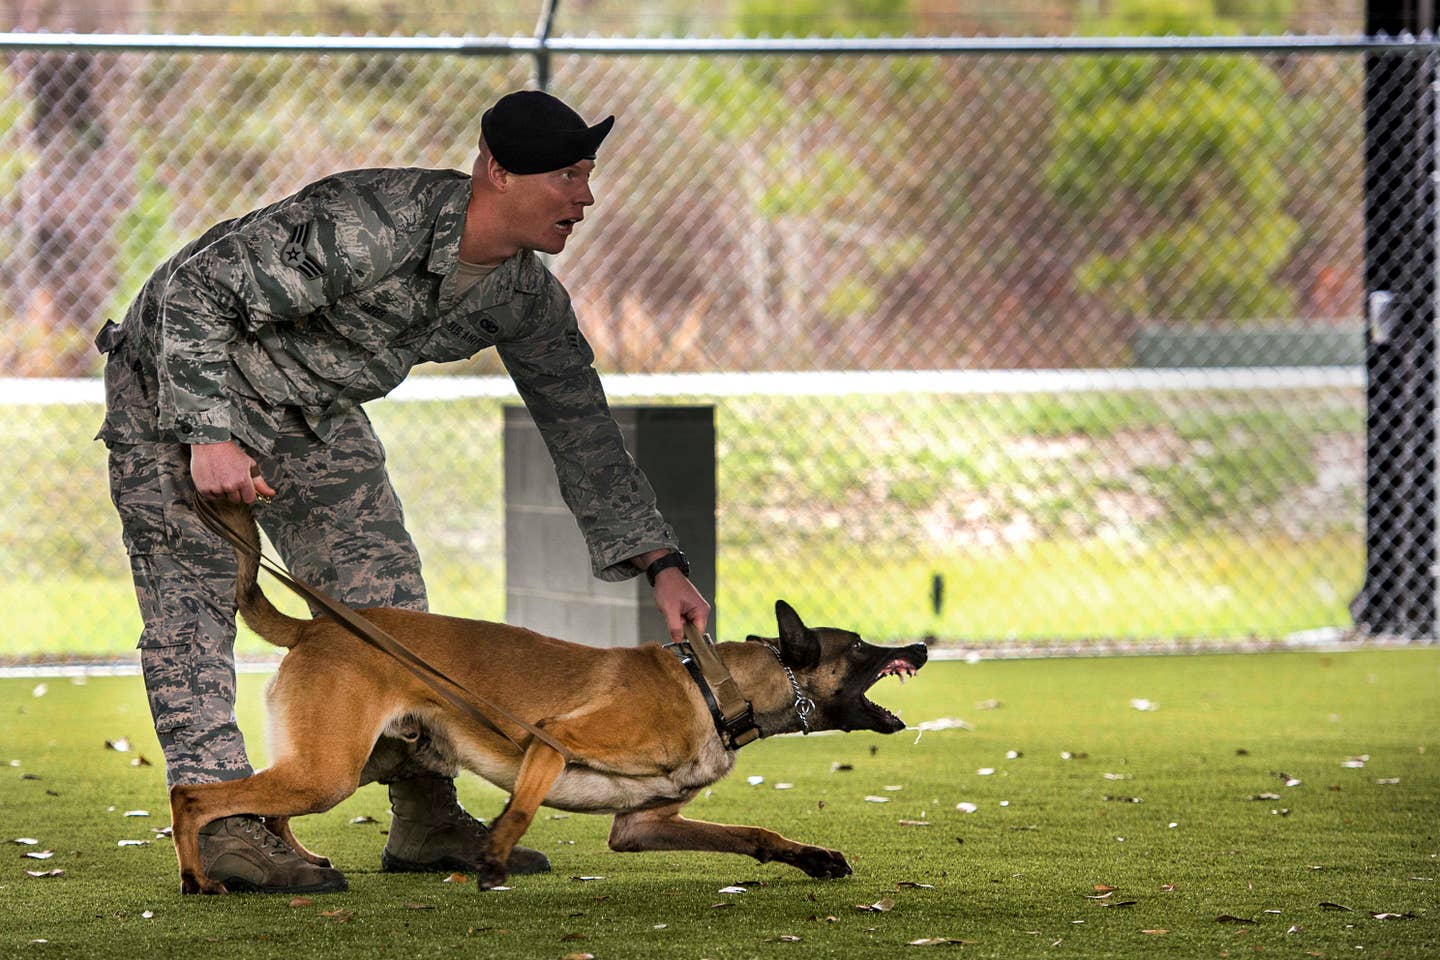 Senior Airman Anthony Hayes, 23d Security Forces Squadron military working dog handler, prepares to release MWD Ttoby during a training demonstration, Feb. 2, 2017 at Moody Air Force Base, Ga. The first Air Force sentry dog school was activated at Showa Air Station, Japan, in 1952 and the second school was opened at Wiesbaden, West Germany in 1953. All MWDs are now trained at Joint Base San Antonio-Lackland, Texas, and then distributed throughout the Department of Defense. (U.S. Air Force photo by Tech. Sgt. Zachary Wolf)